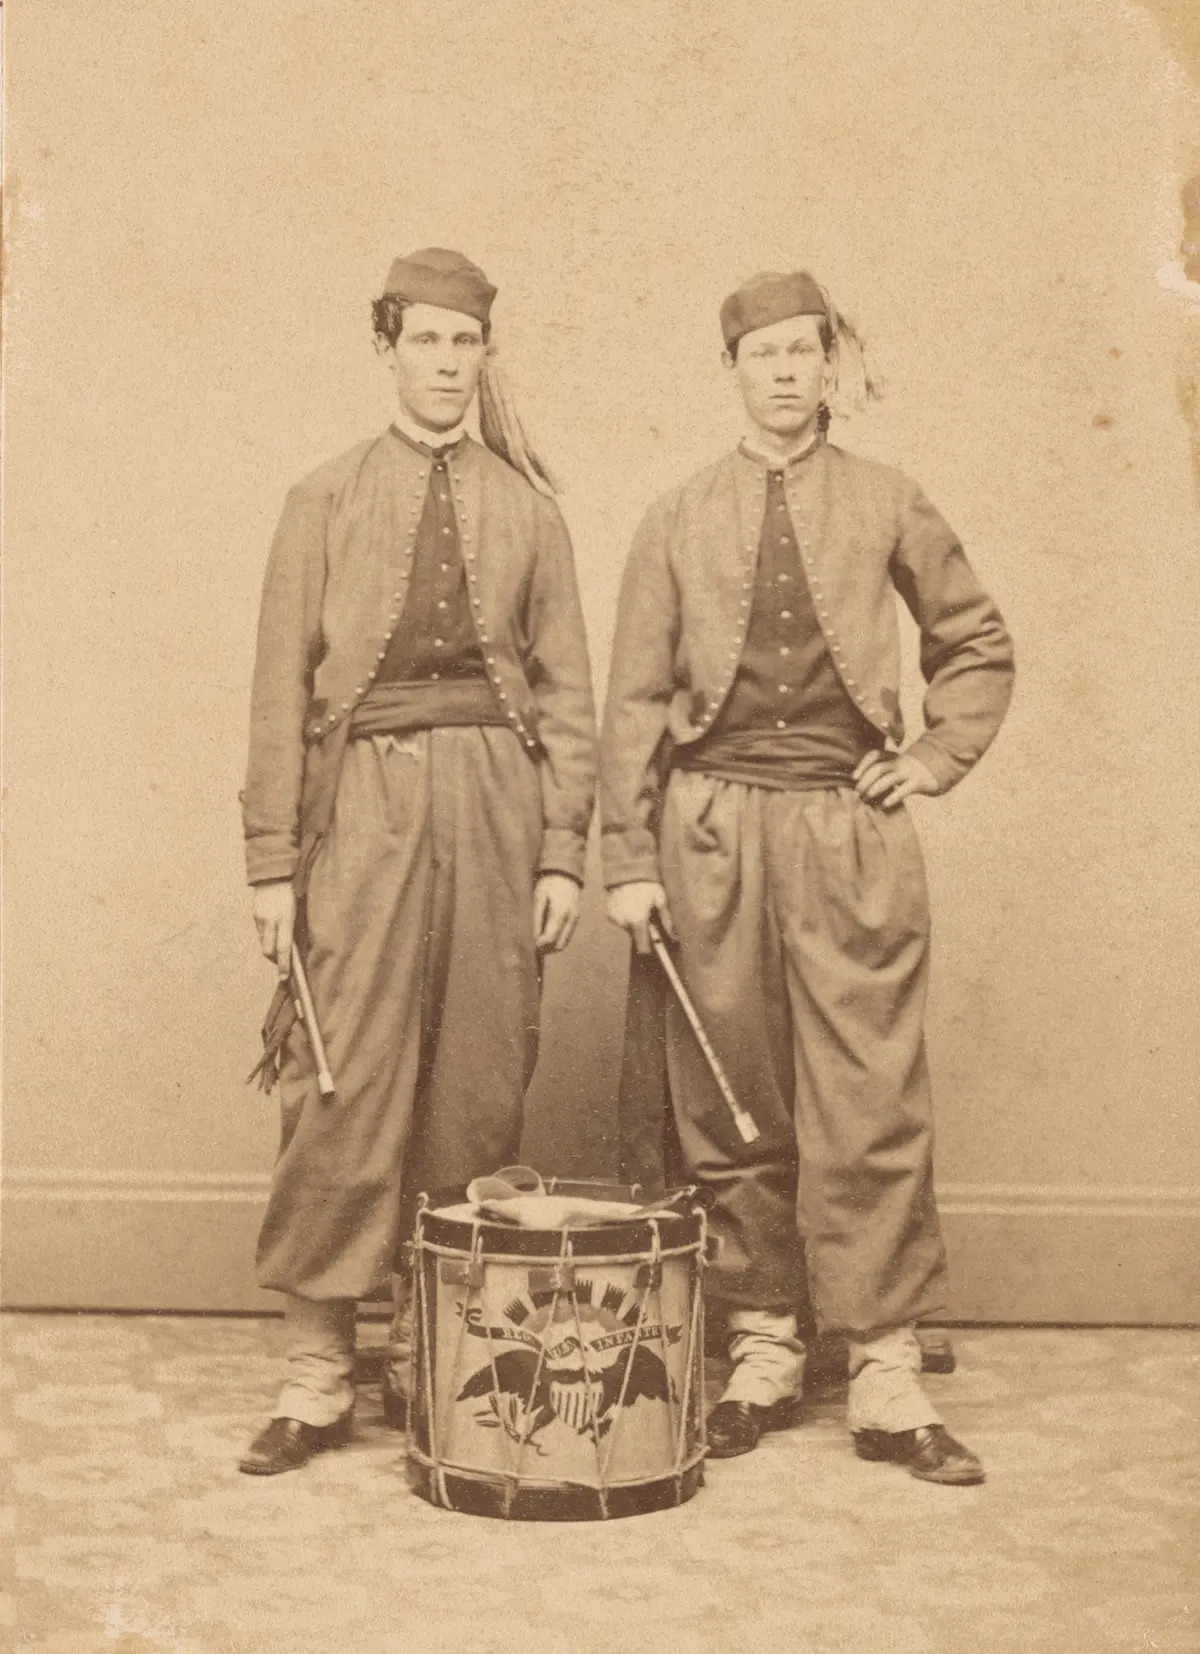 A photograph of Union soldiers in zouave uniforms with fifes in their hands and regulation drum at their feet, between 1861 and 1865, by R. P. Lamoreux. Library of Congress. (Public Domain)